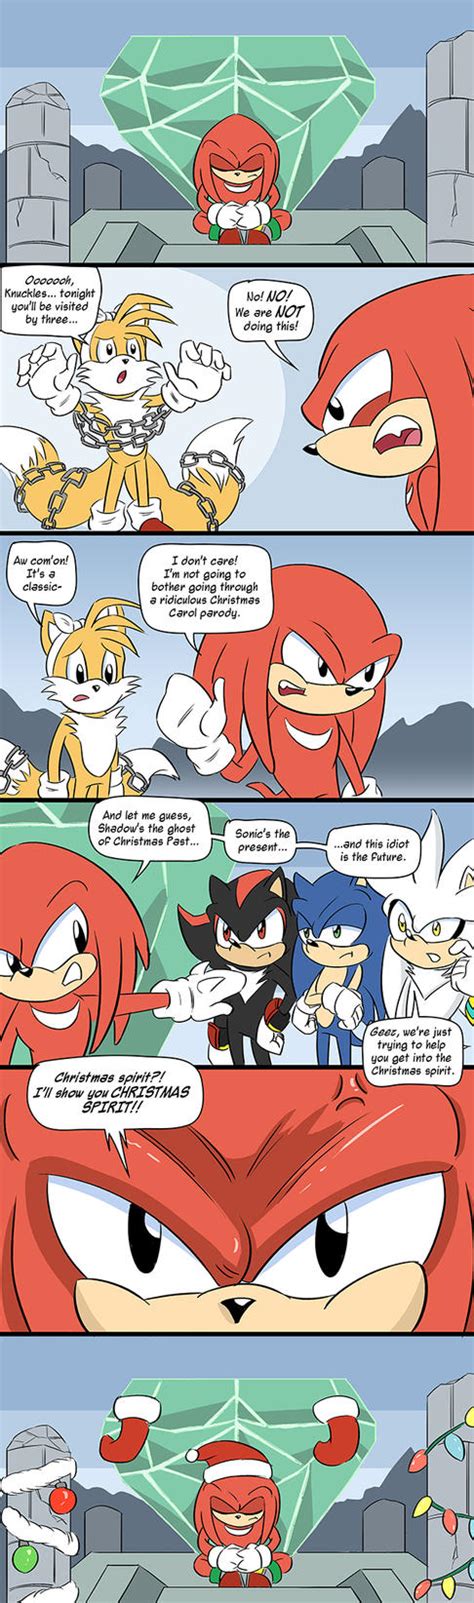 A Very Knuckles Christmas Carol By Chauvels On Deviantart